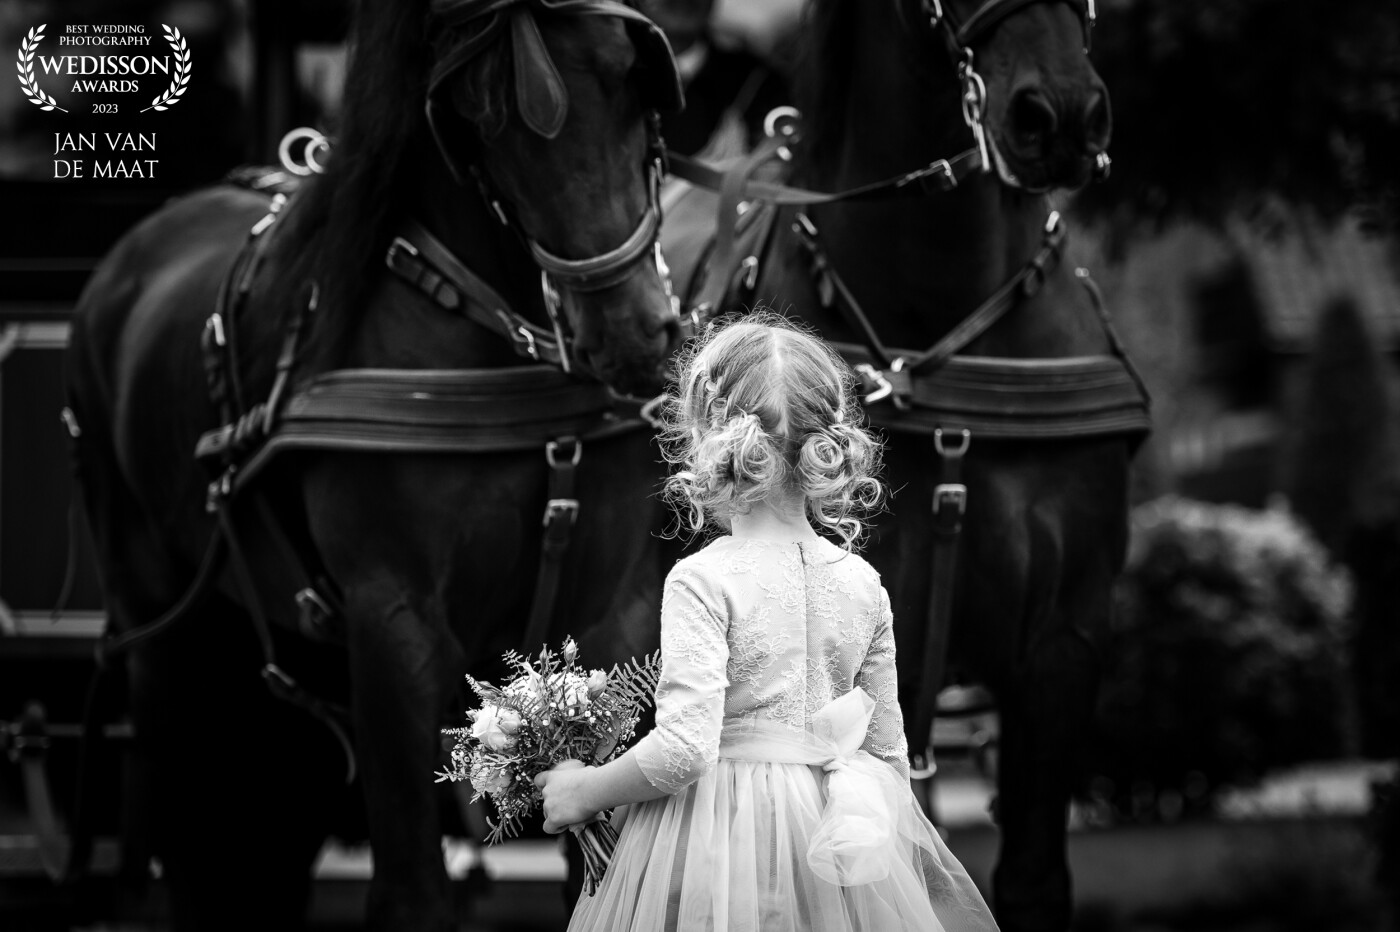 This flower girl with bouquet was standing in front of the two horses. The horses were in front of the wedding coach which was parked aside the road. The flower girl looked at them almost daydreaming and one horse looked back at her like they were talking.